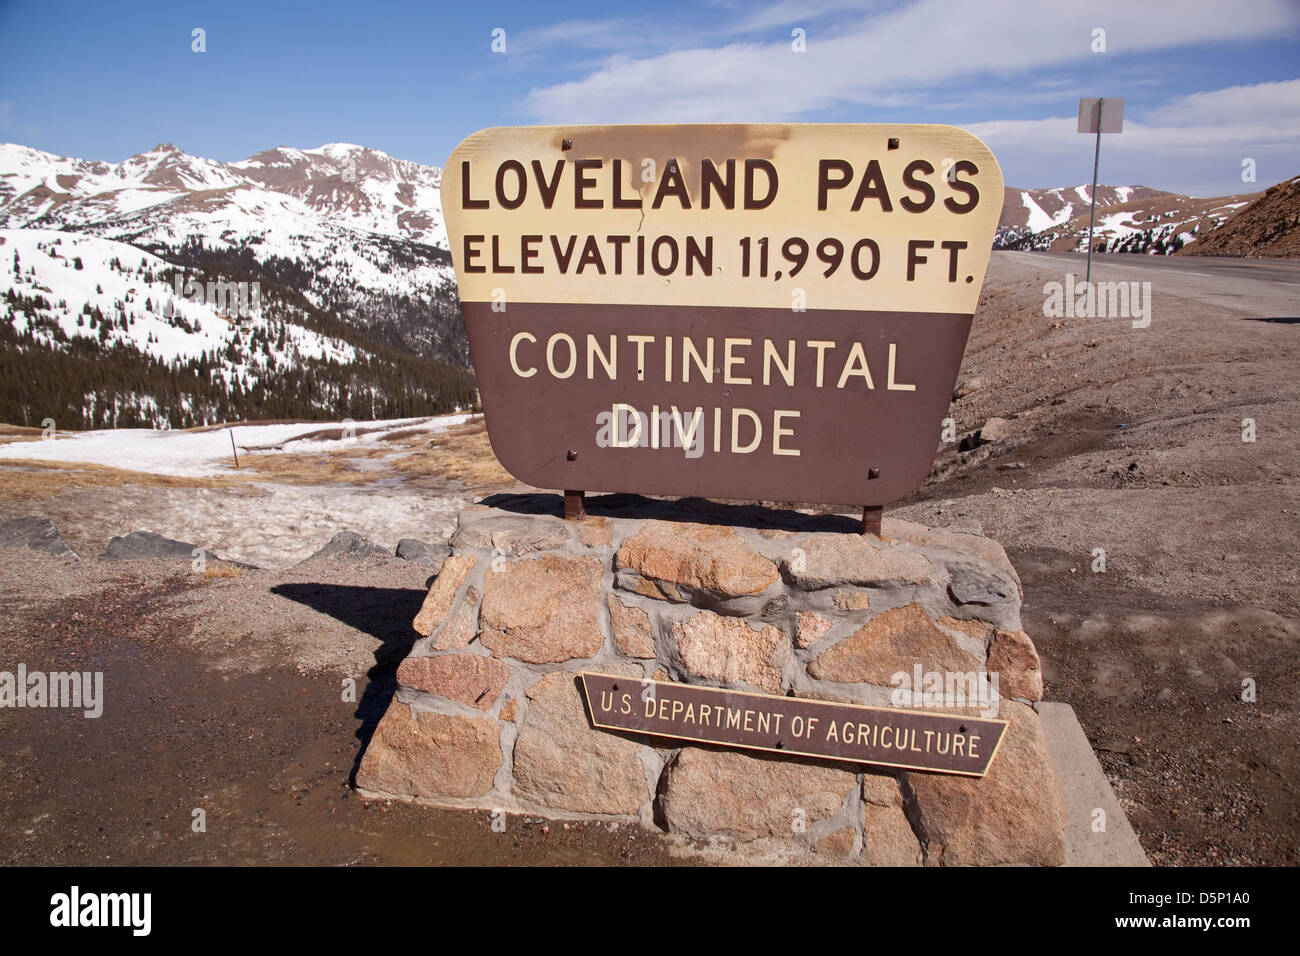 Continental Divide in Loveland pass Stock Photo